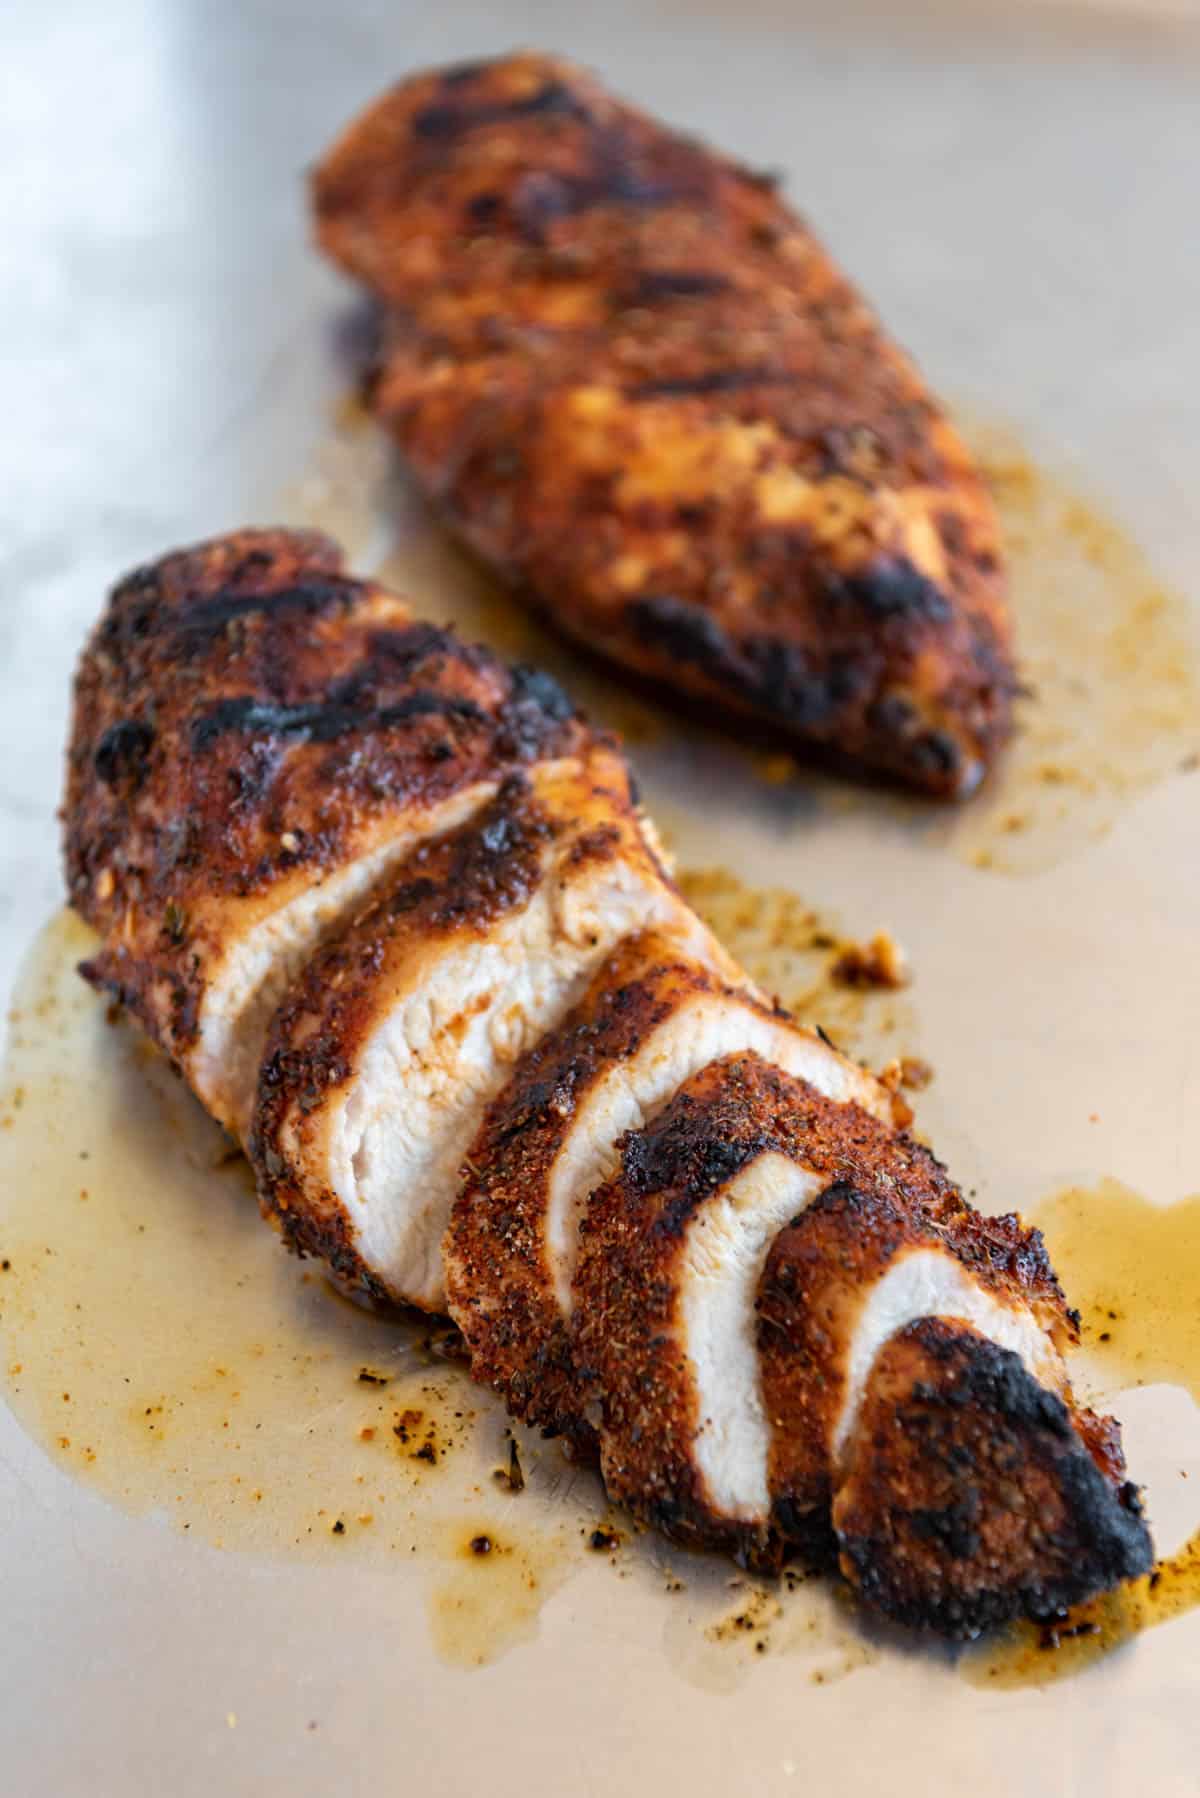 Seasoned and cooked grilled cajun chicken breasts sliced into coins to reveal juicy chicken inside.